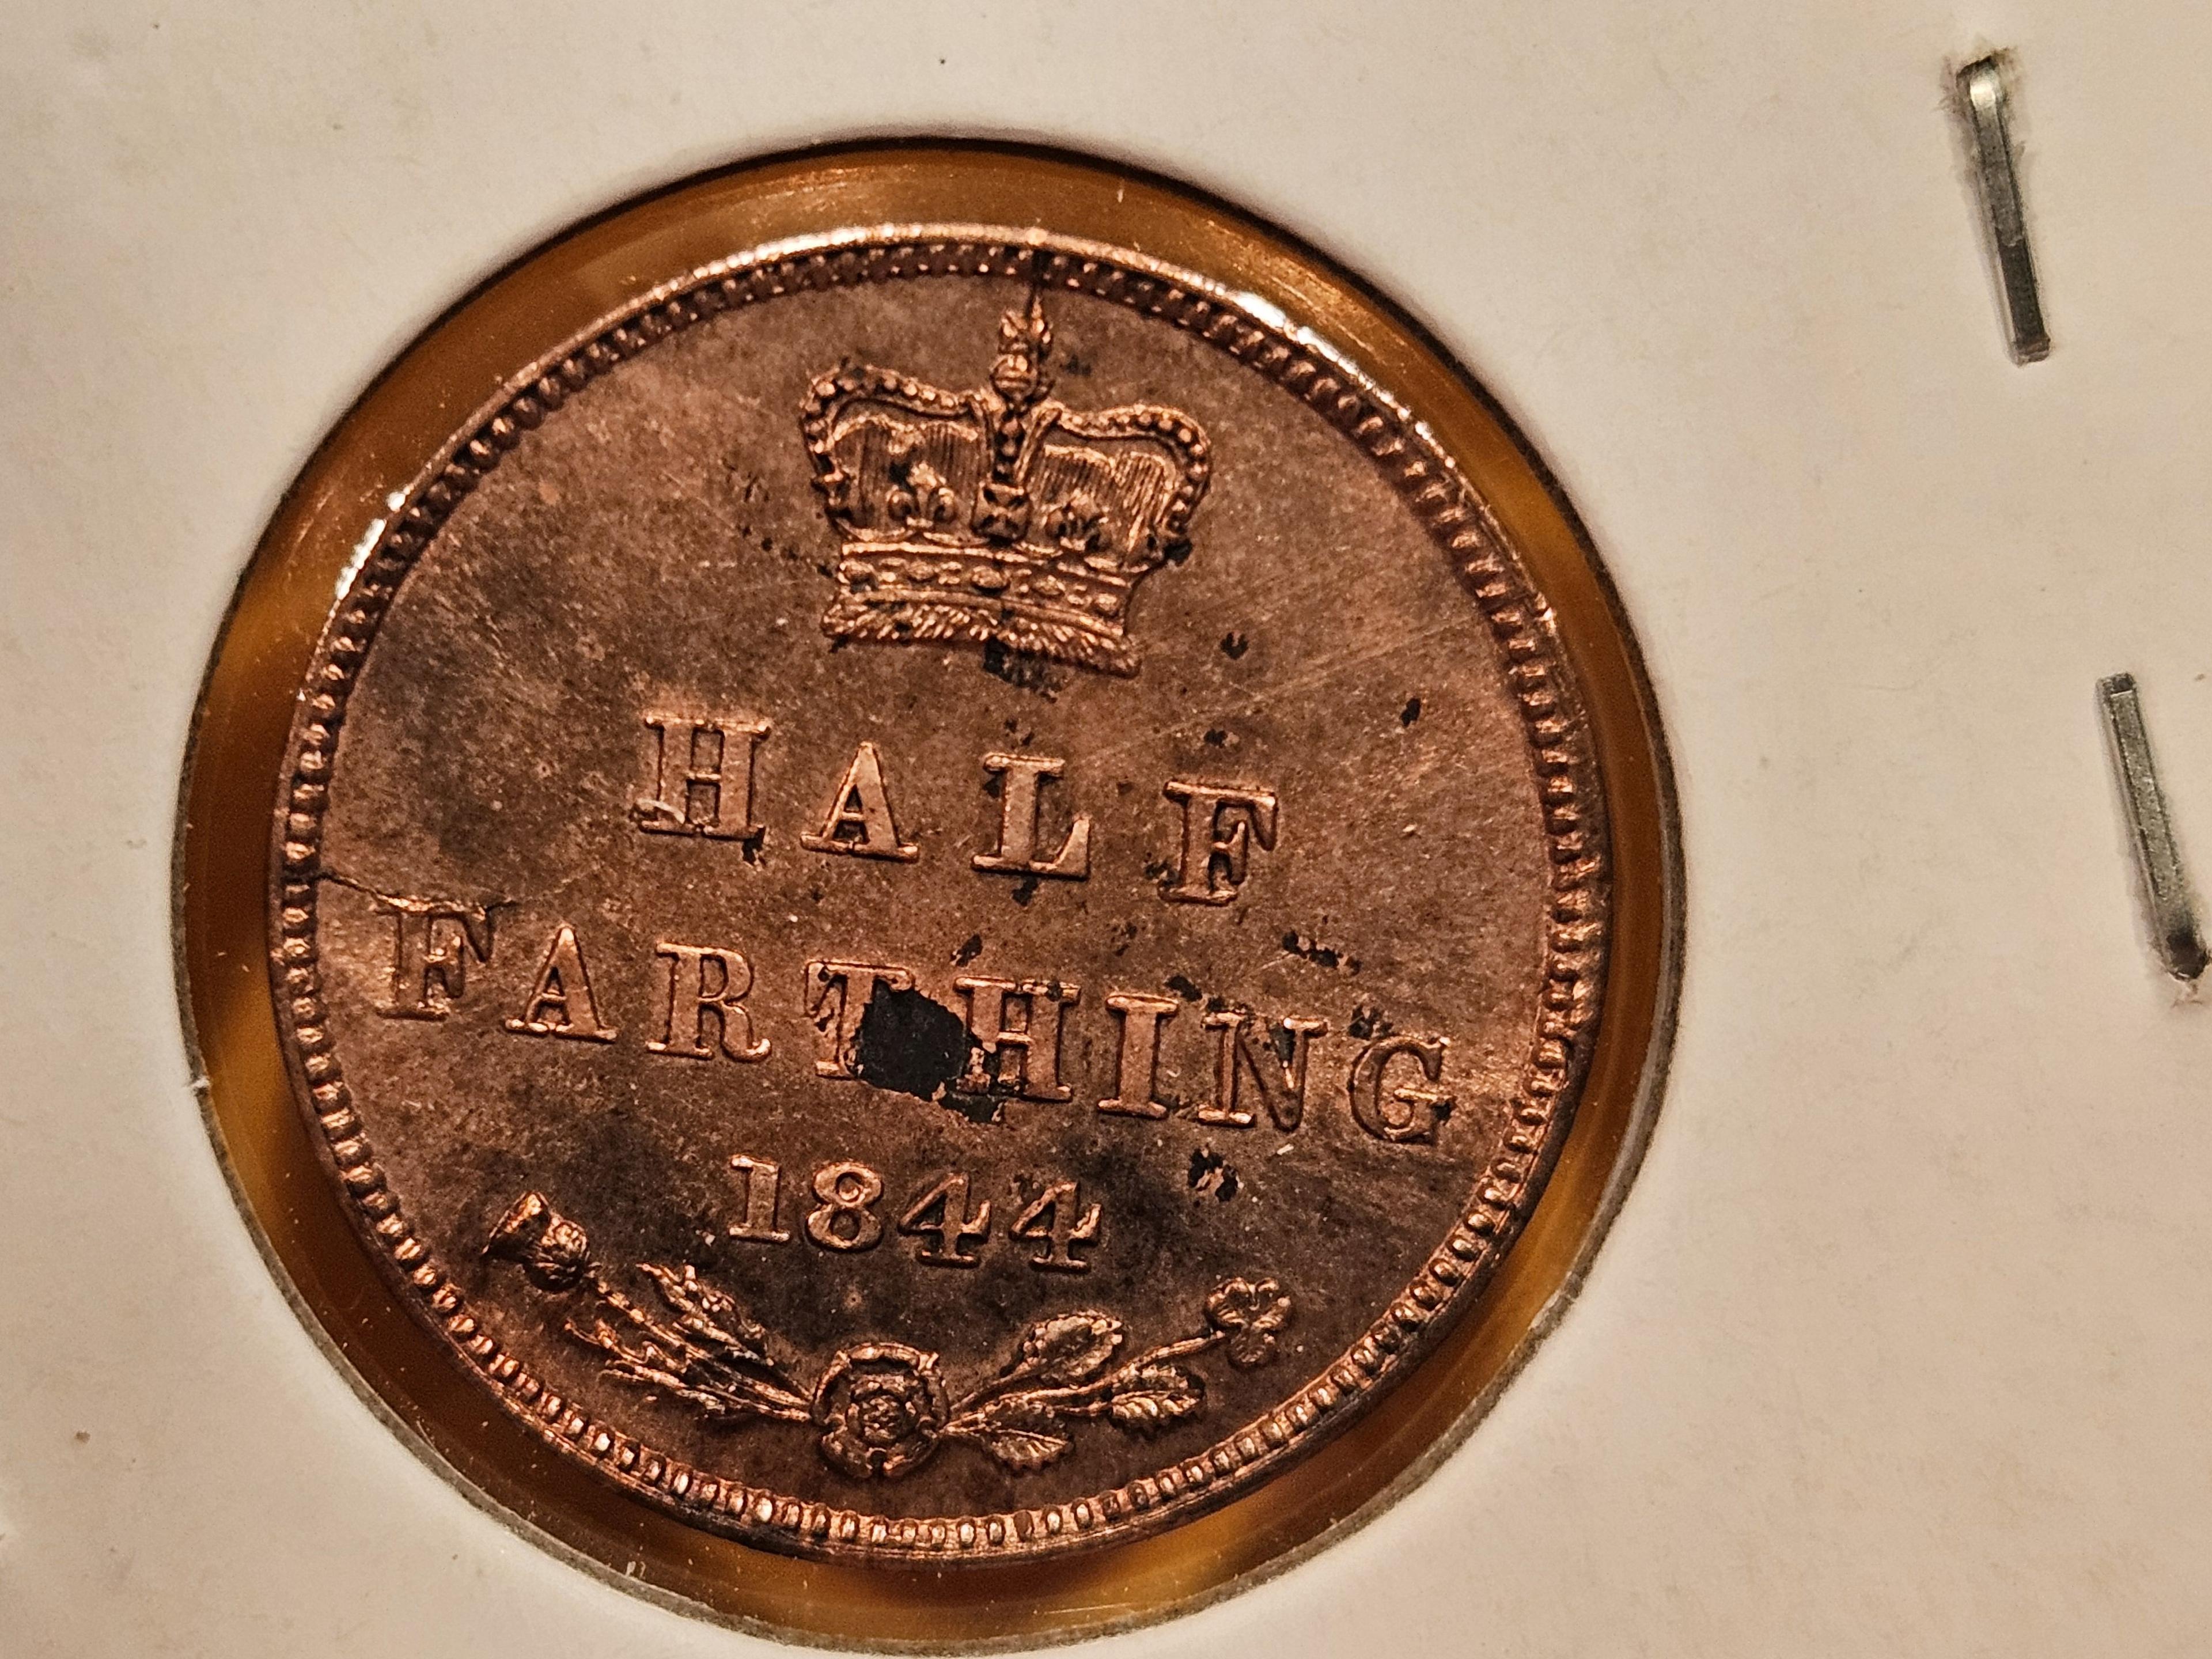 Very Choice Brilliant Uncirculated 1844 Great Britain 1/2 farthing